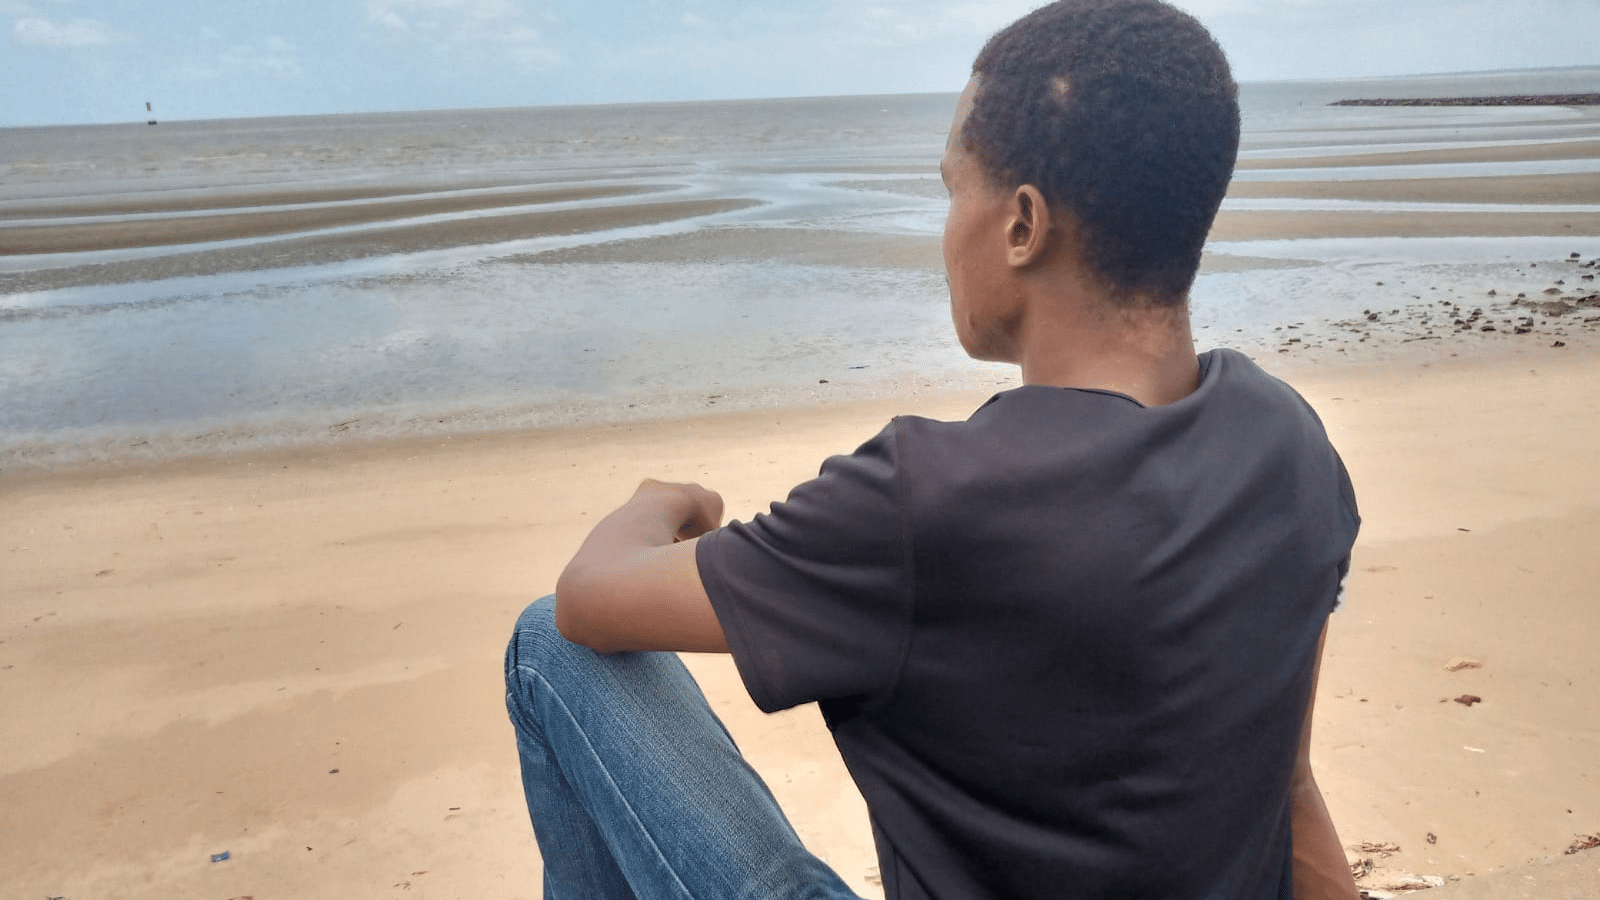 Duarte, a young person living with HIV who has been supported through partners of the Elton John AIDS Foundation, sits on a beach in Mozambique looking out at the water.